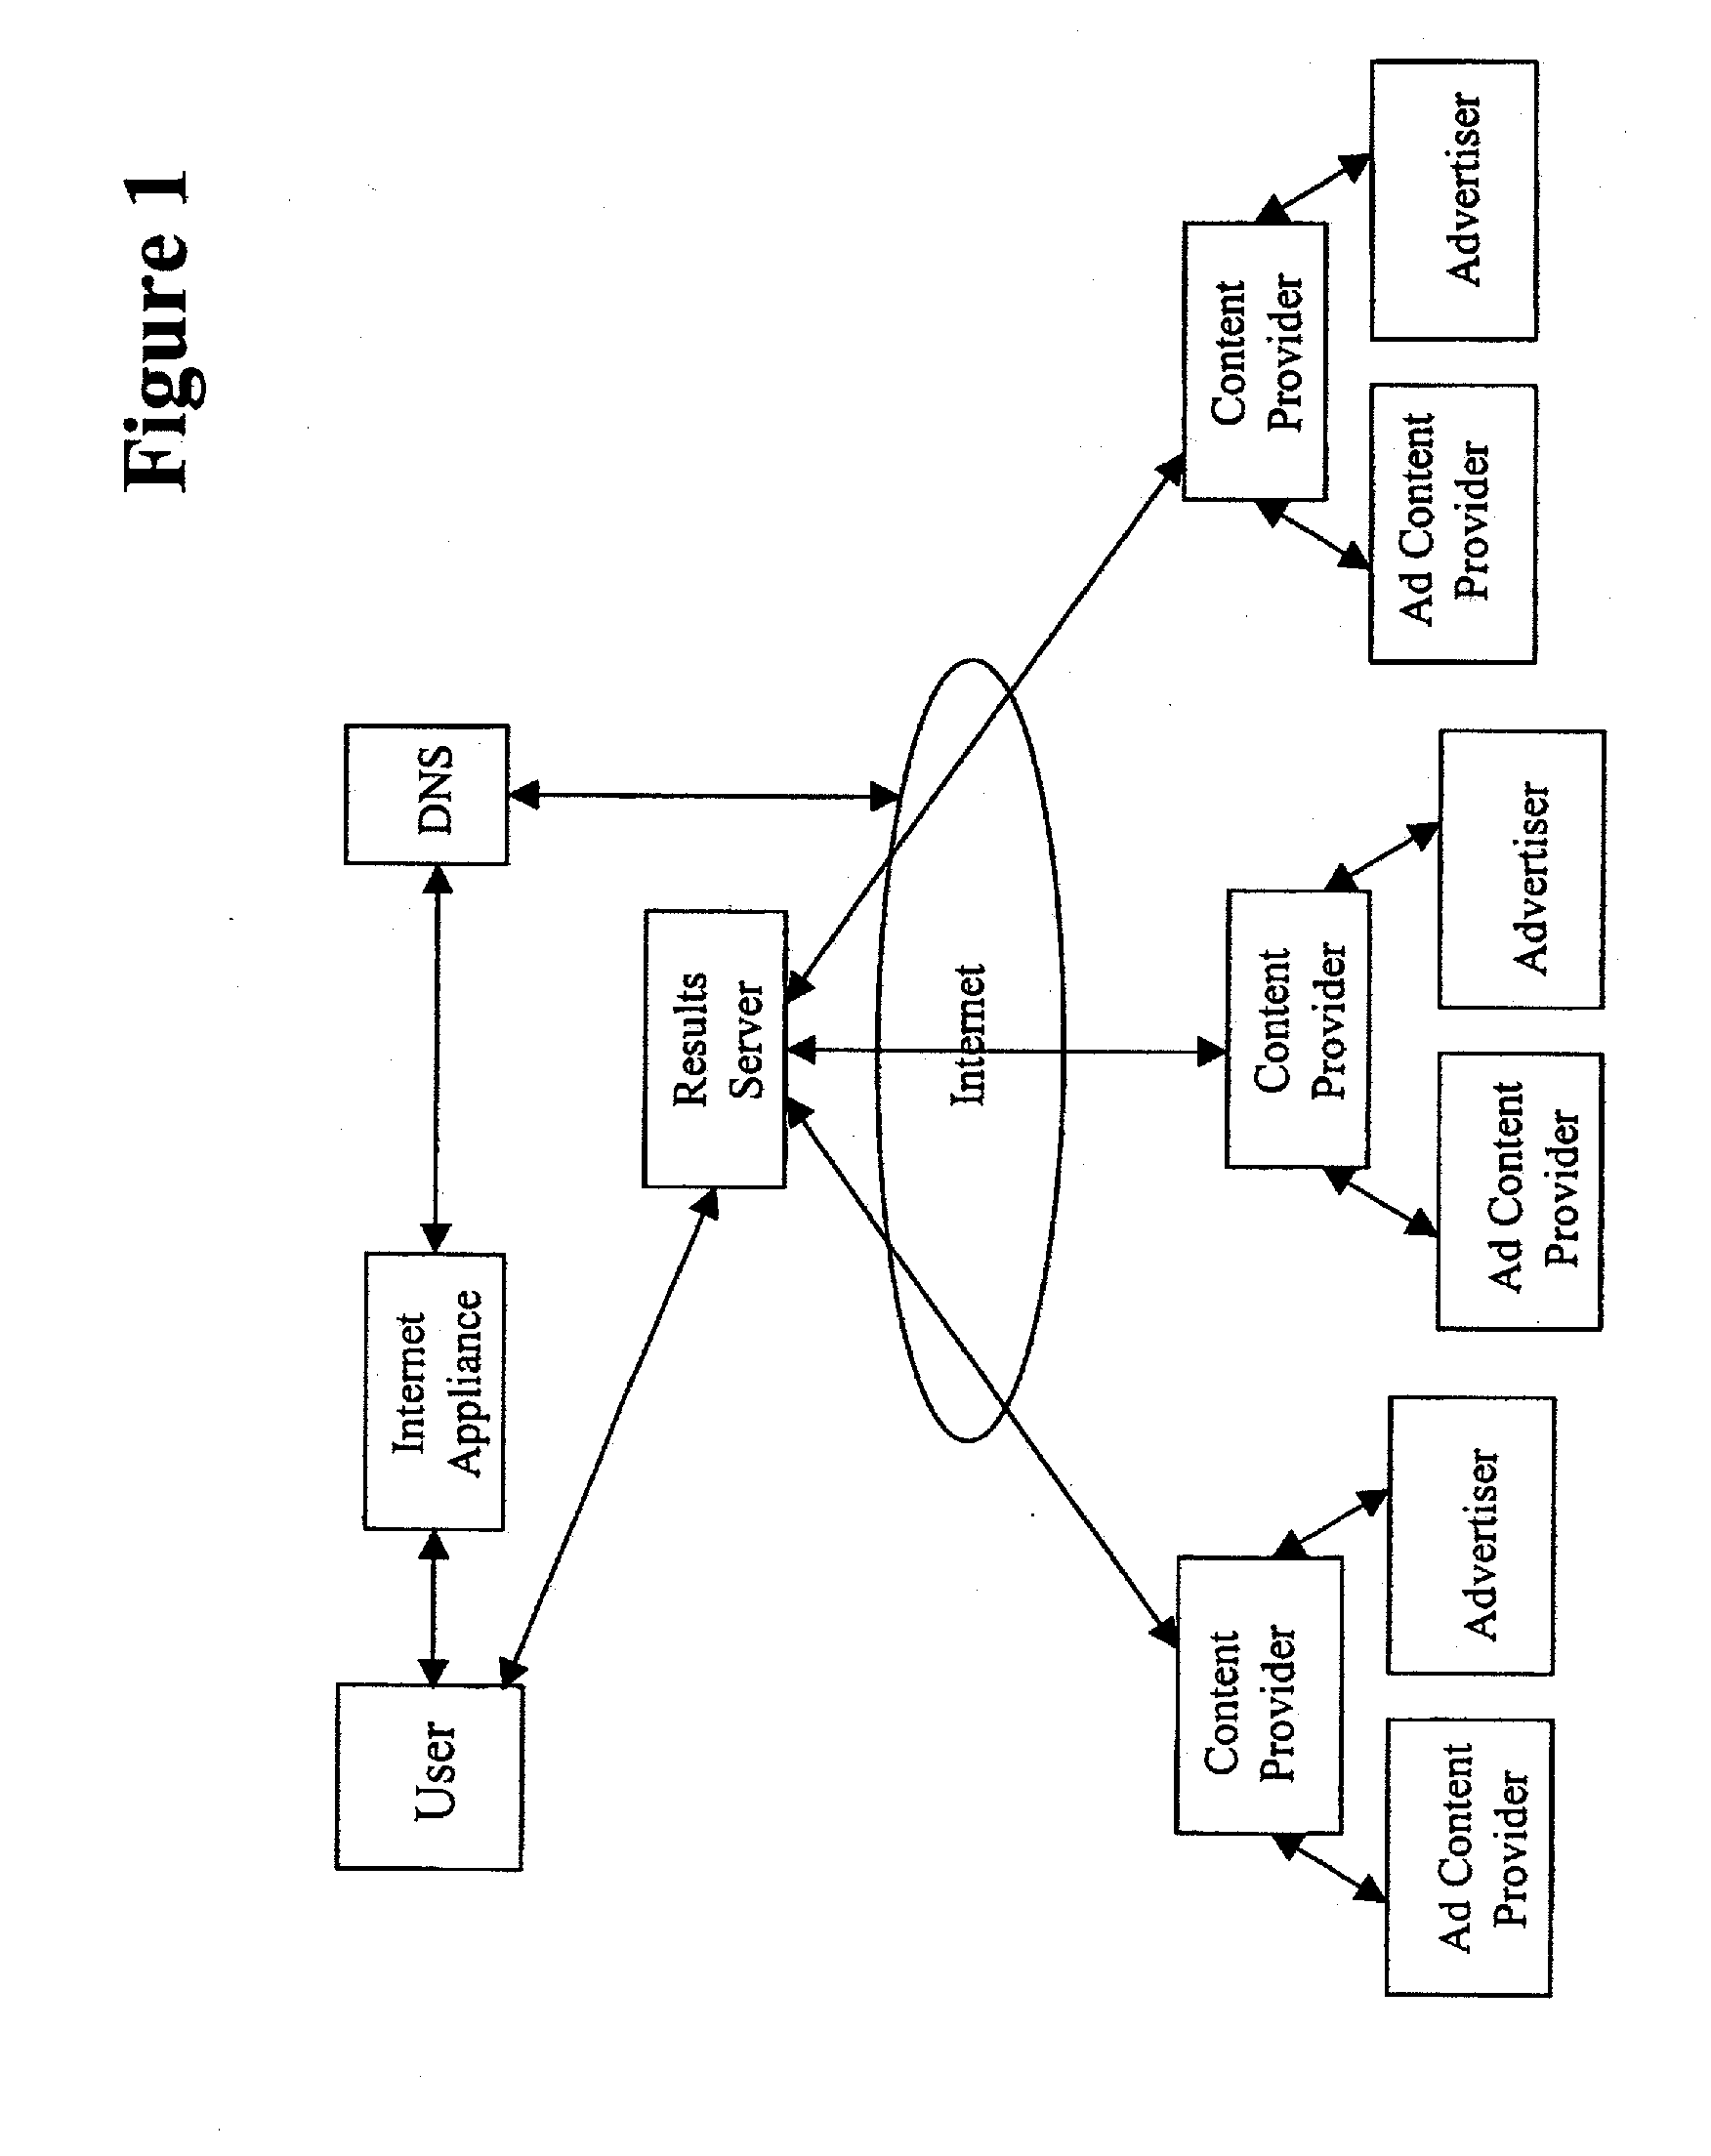 Systems and methods for providing information and conducting business using the internet